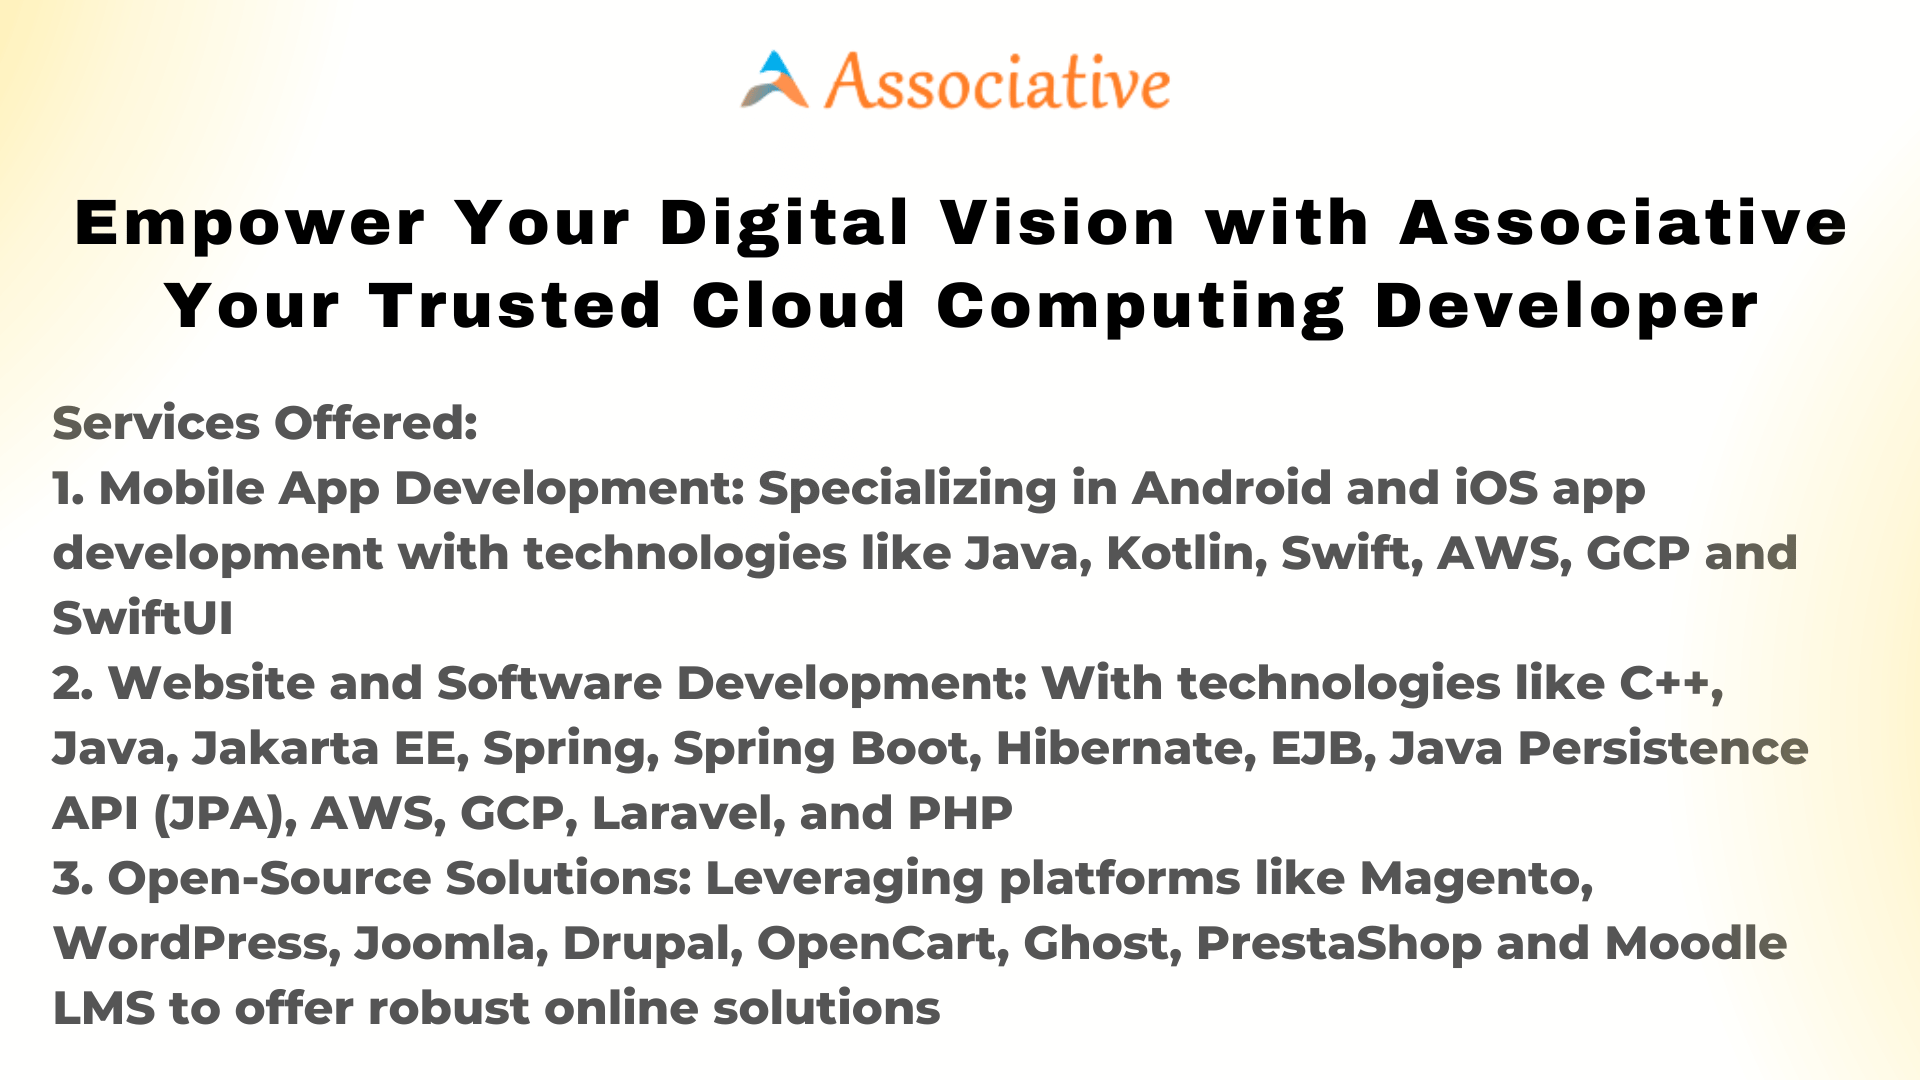 Empower Your Digital Vision with Associative Your Trusted Cloud Computing Developer